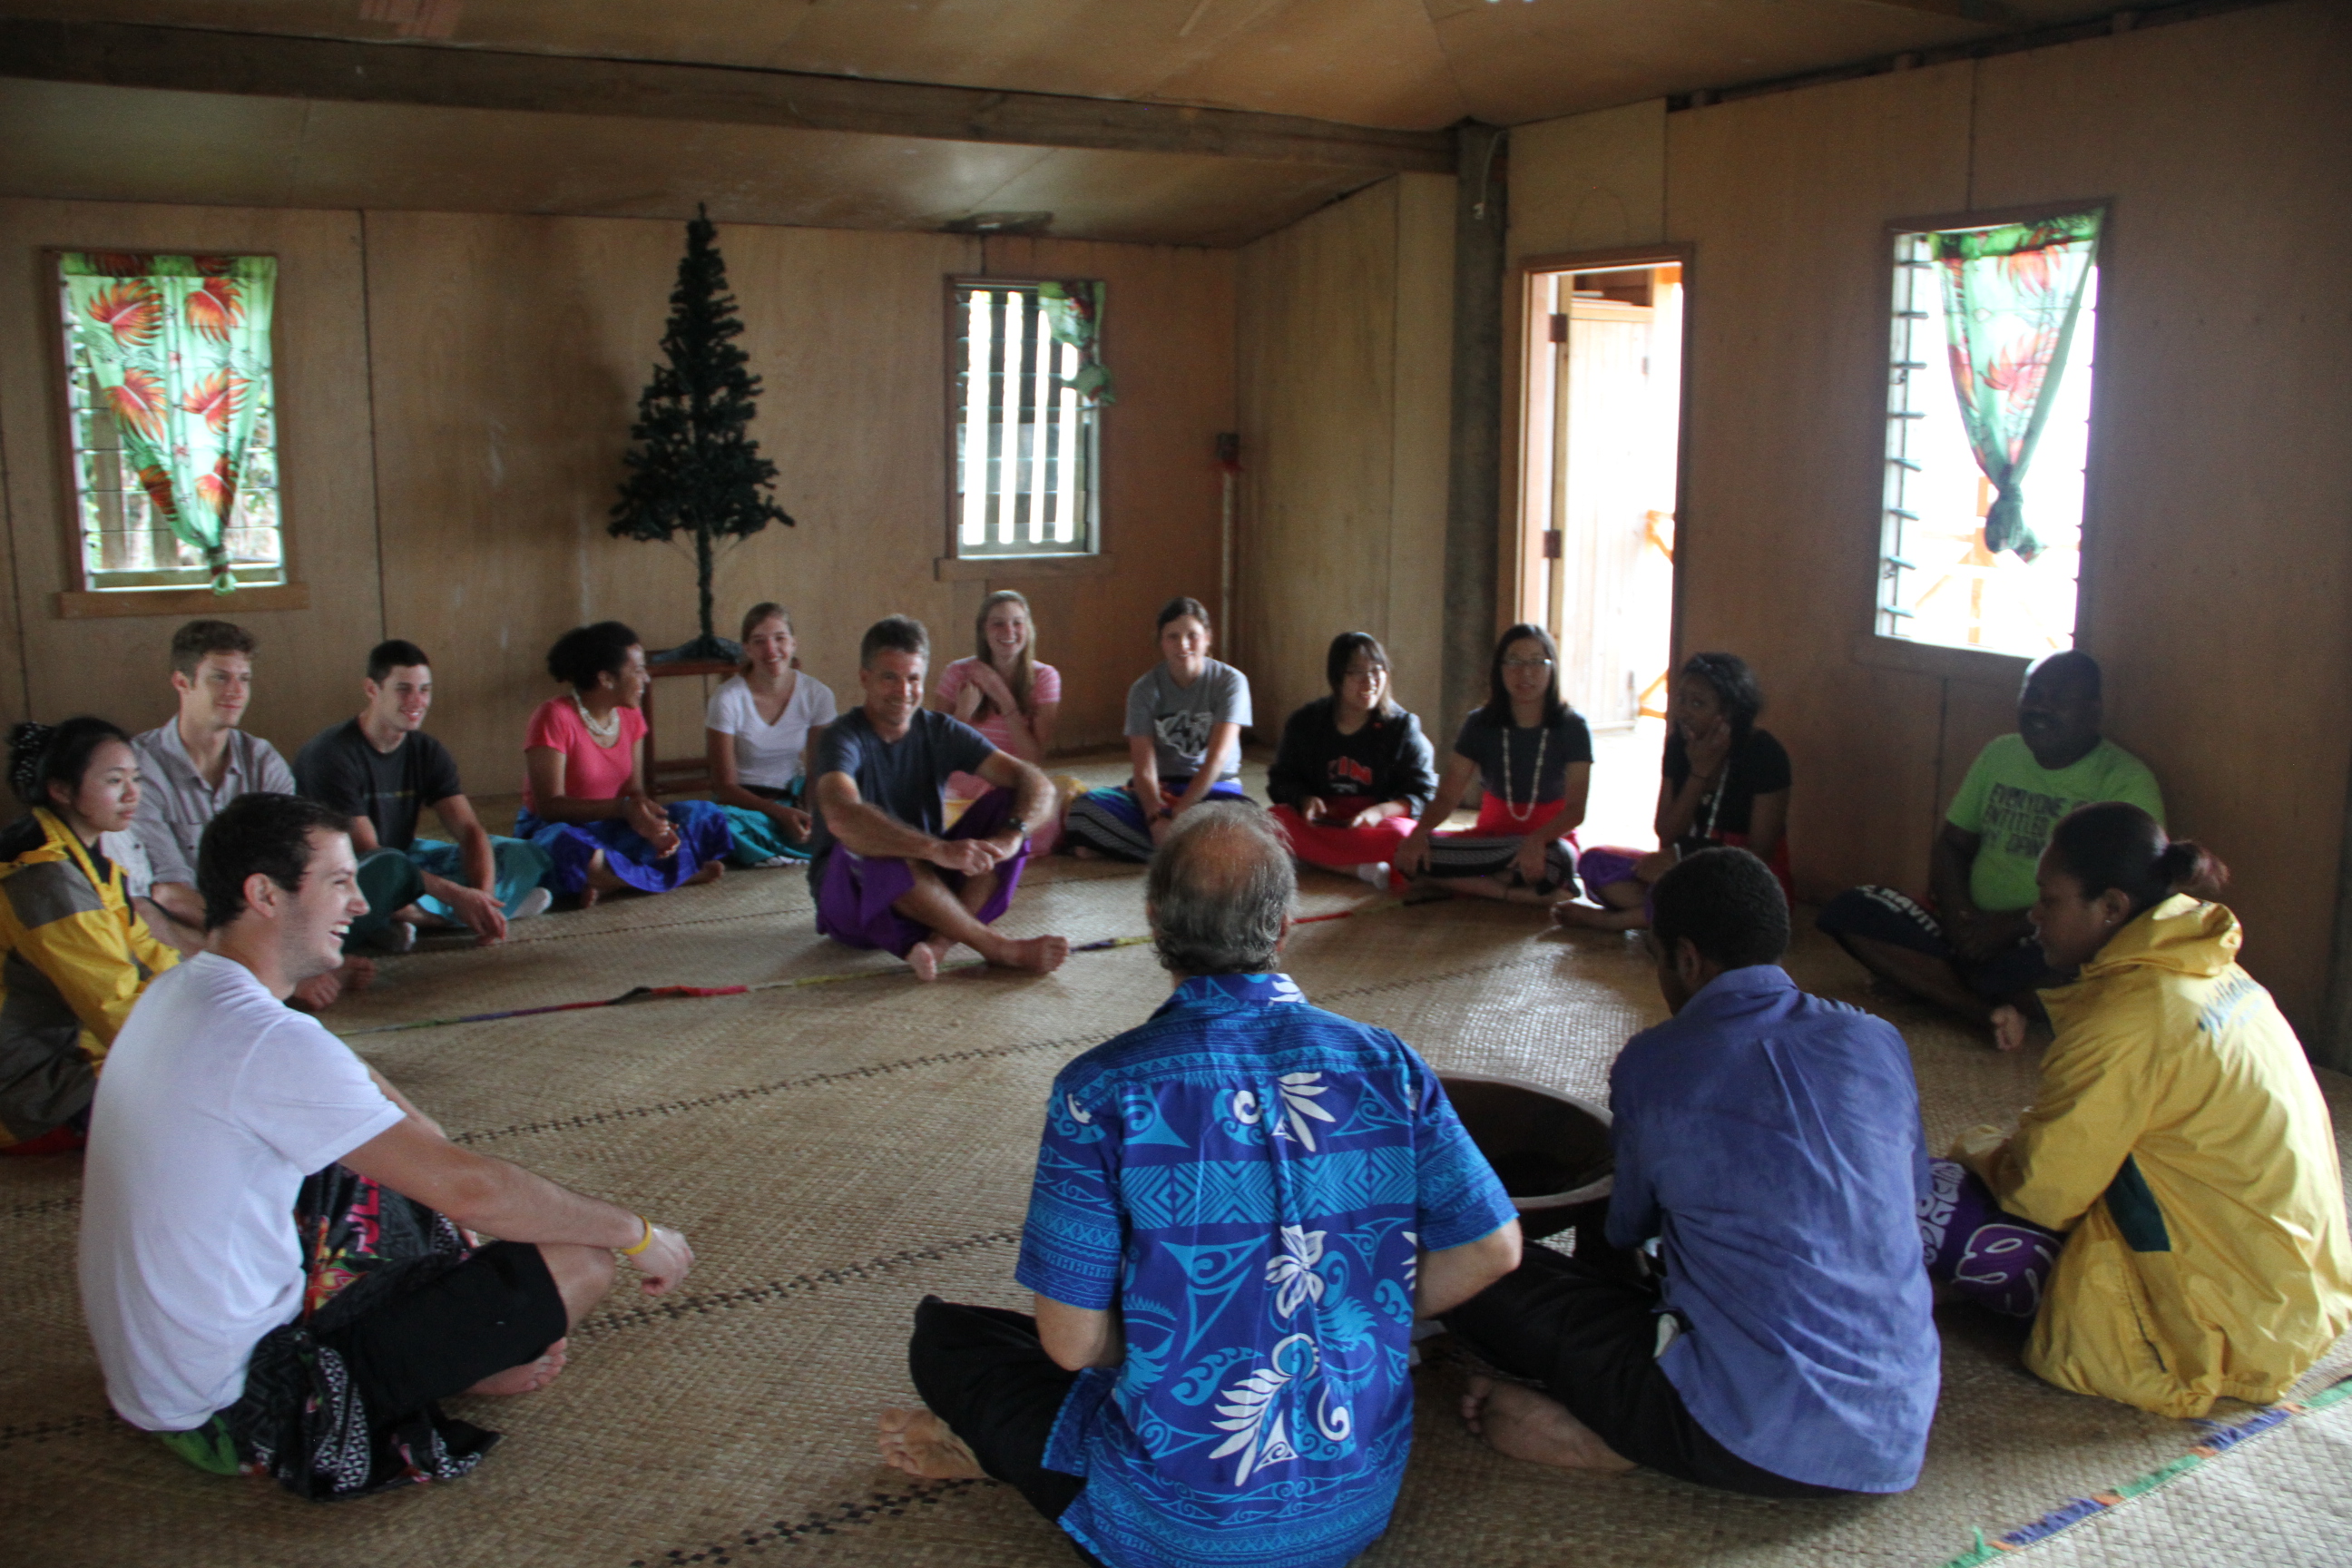 Students listening to locals' introduction of the kava ceremony